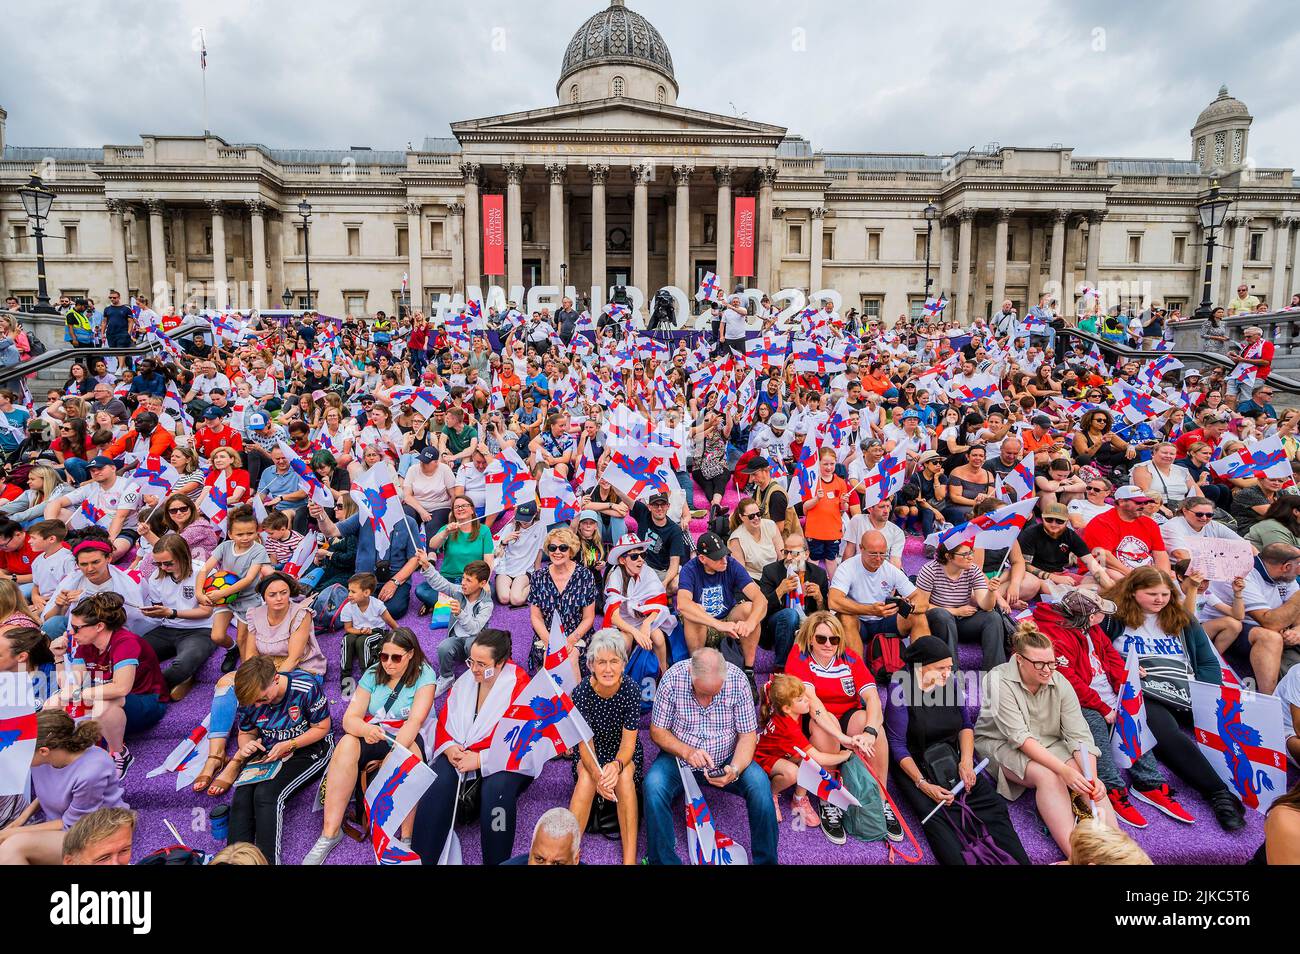 London, UK. 01st Aug, 2022. England celebration after winning the UEFA Women's EURO 2022 final. The event in Trafalgar Square was organised by the FA, the Mayor of London Sadiq Khan, and tournament organisers. It offered free access for up to 7,000 supporters. Credit: Guy Bell/Alamy Live News Stock Photo